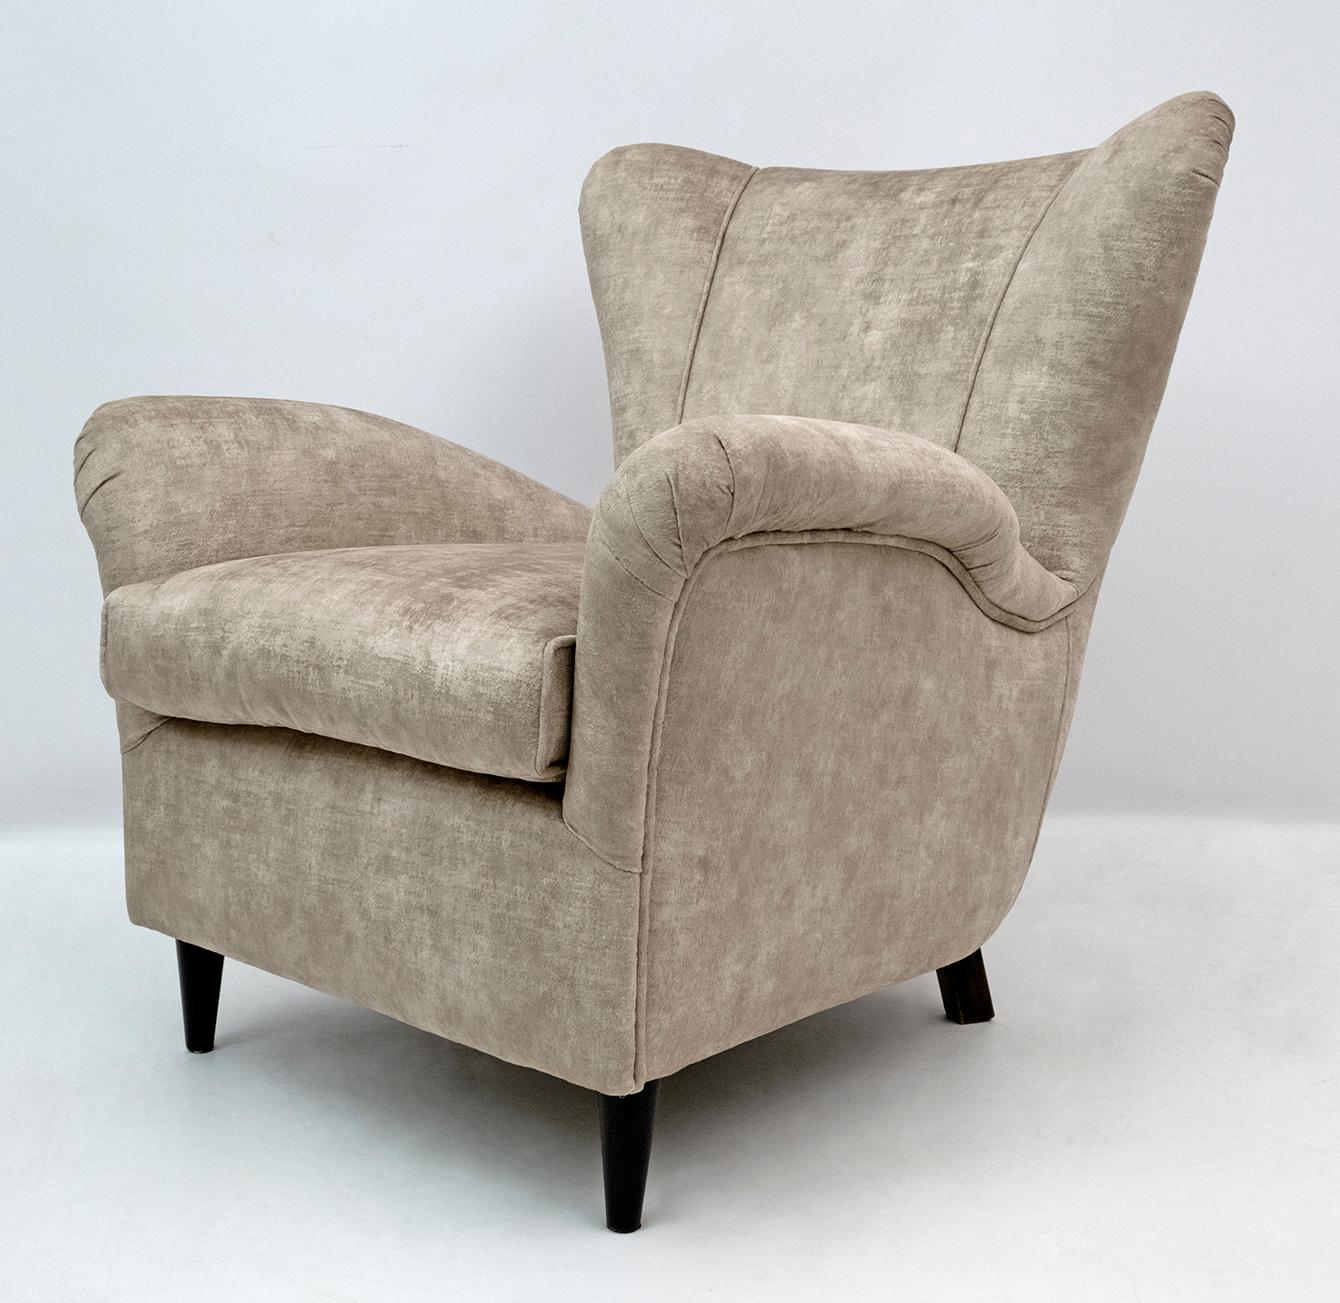 Attributed Gio Ponti Mid-Century Modern Italian Velvet Armchairs for ISA, Pair For Sale 5